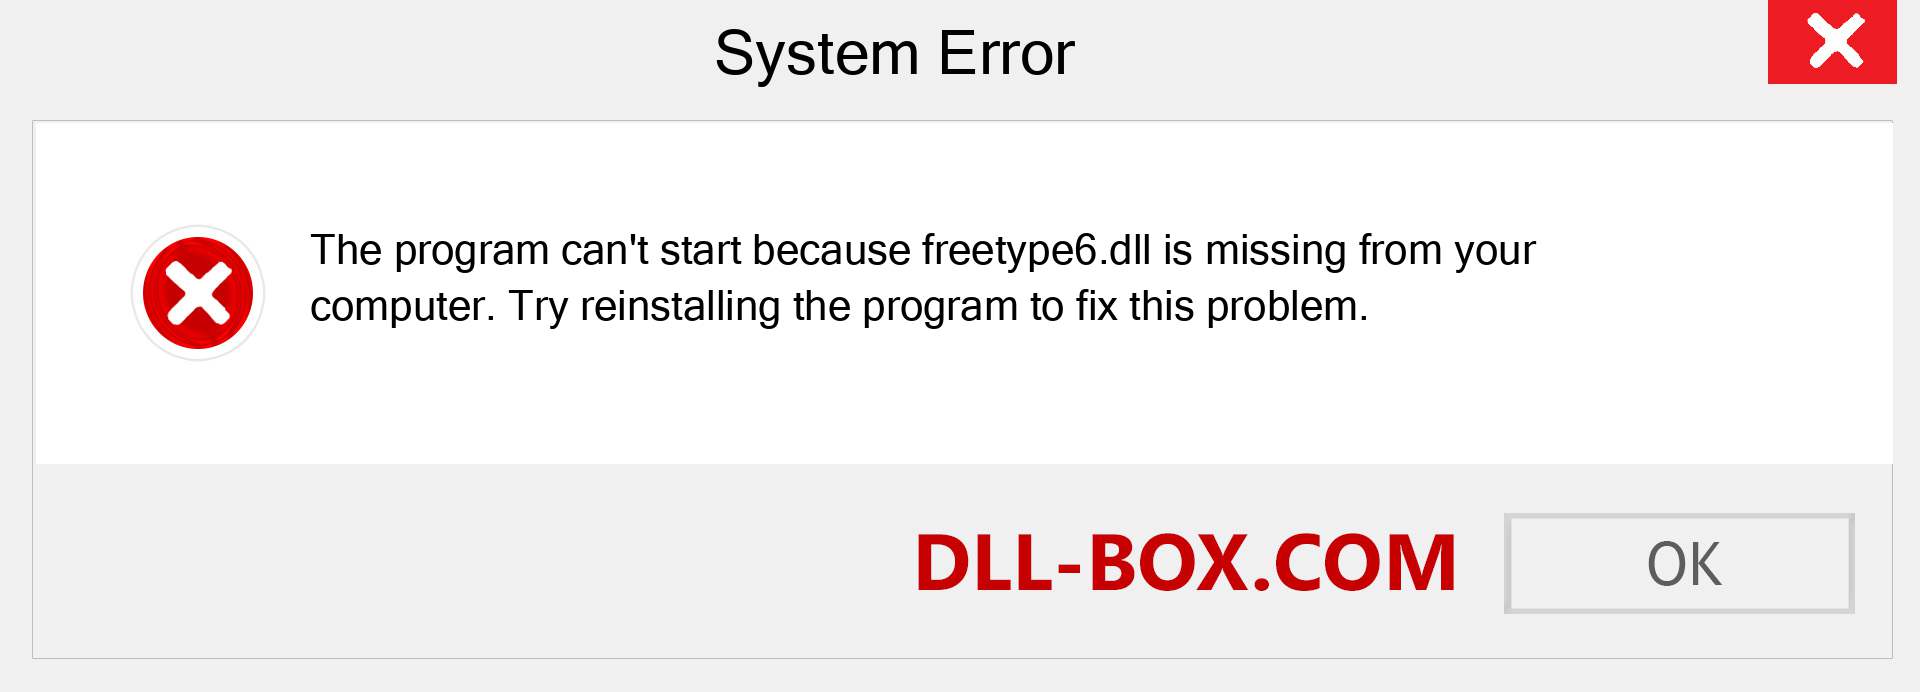  freetype6.dll file is missing?. Download for Windows 7, 8, 10 - Fix  freetype6 dll Missing Error on Windows, photos, images